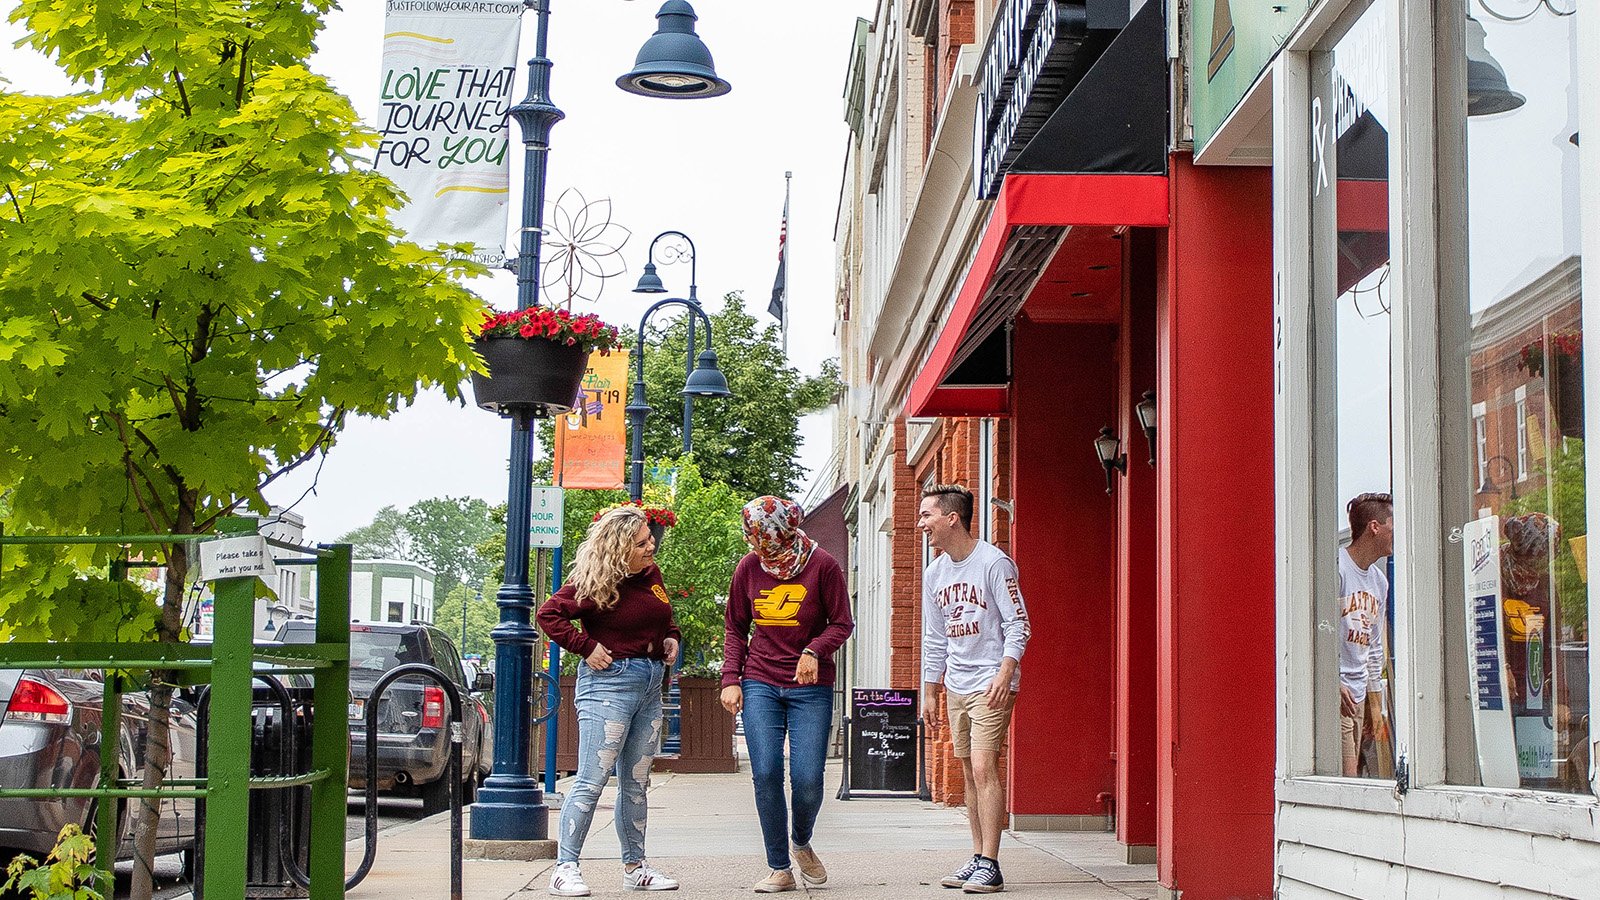 Three students stand on a downtown city sidewalk laughing. The sidewalk has small shops lining the street.